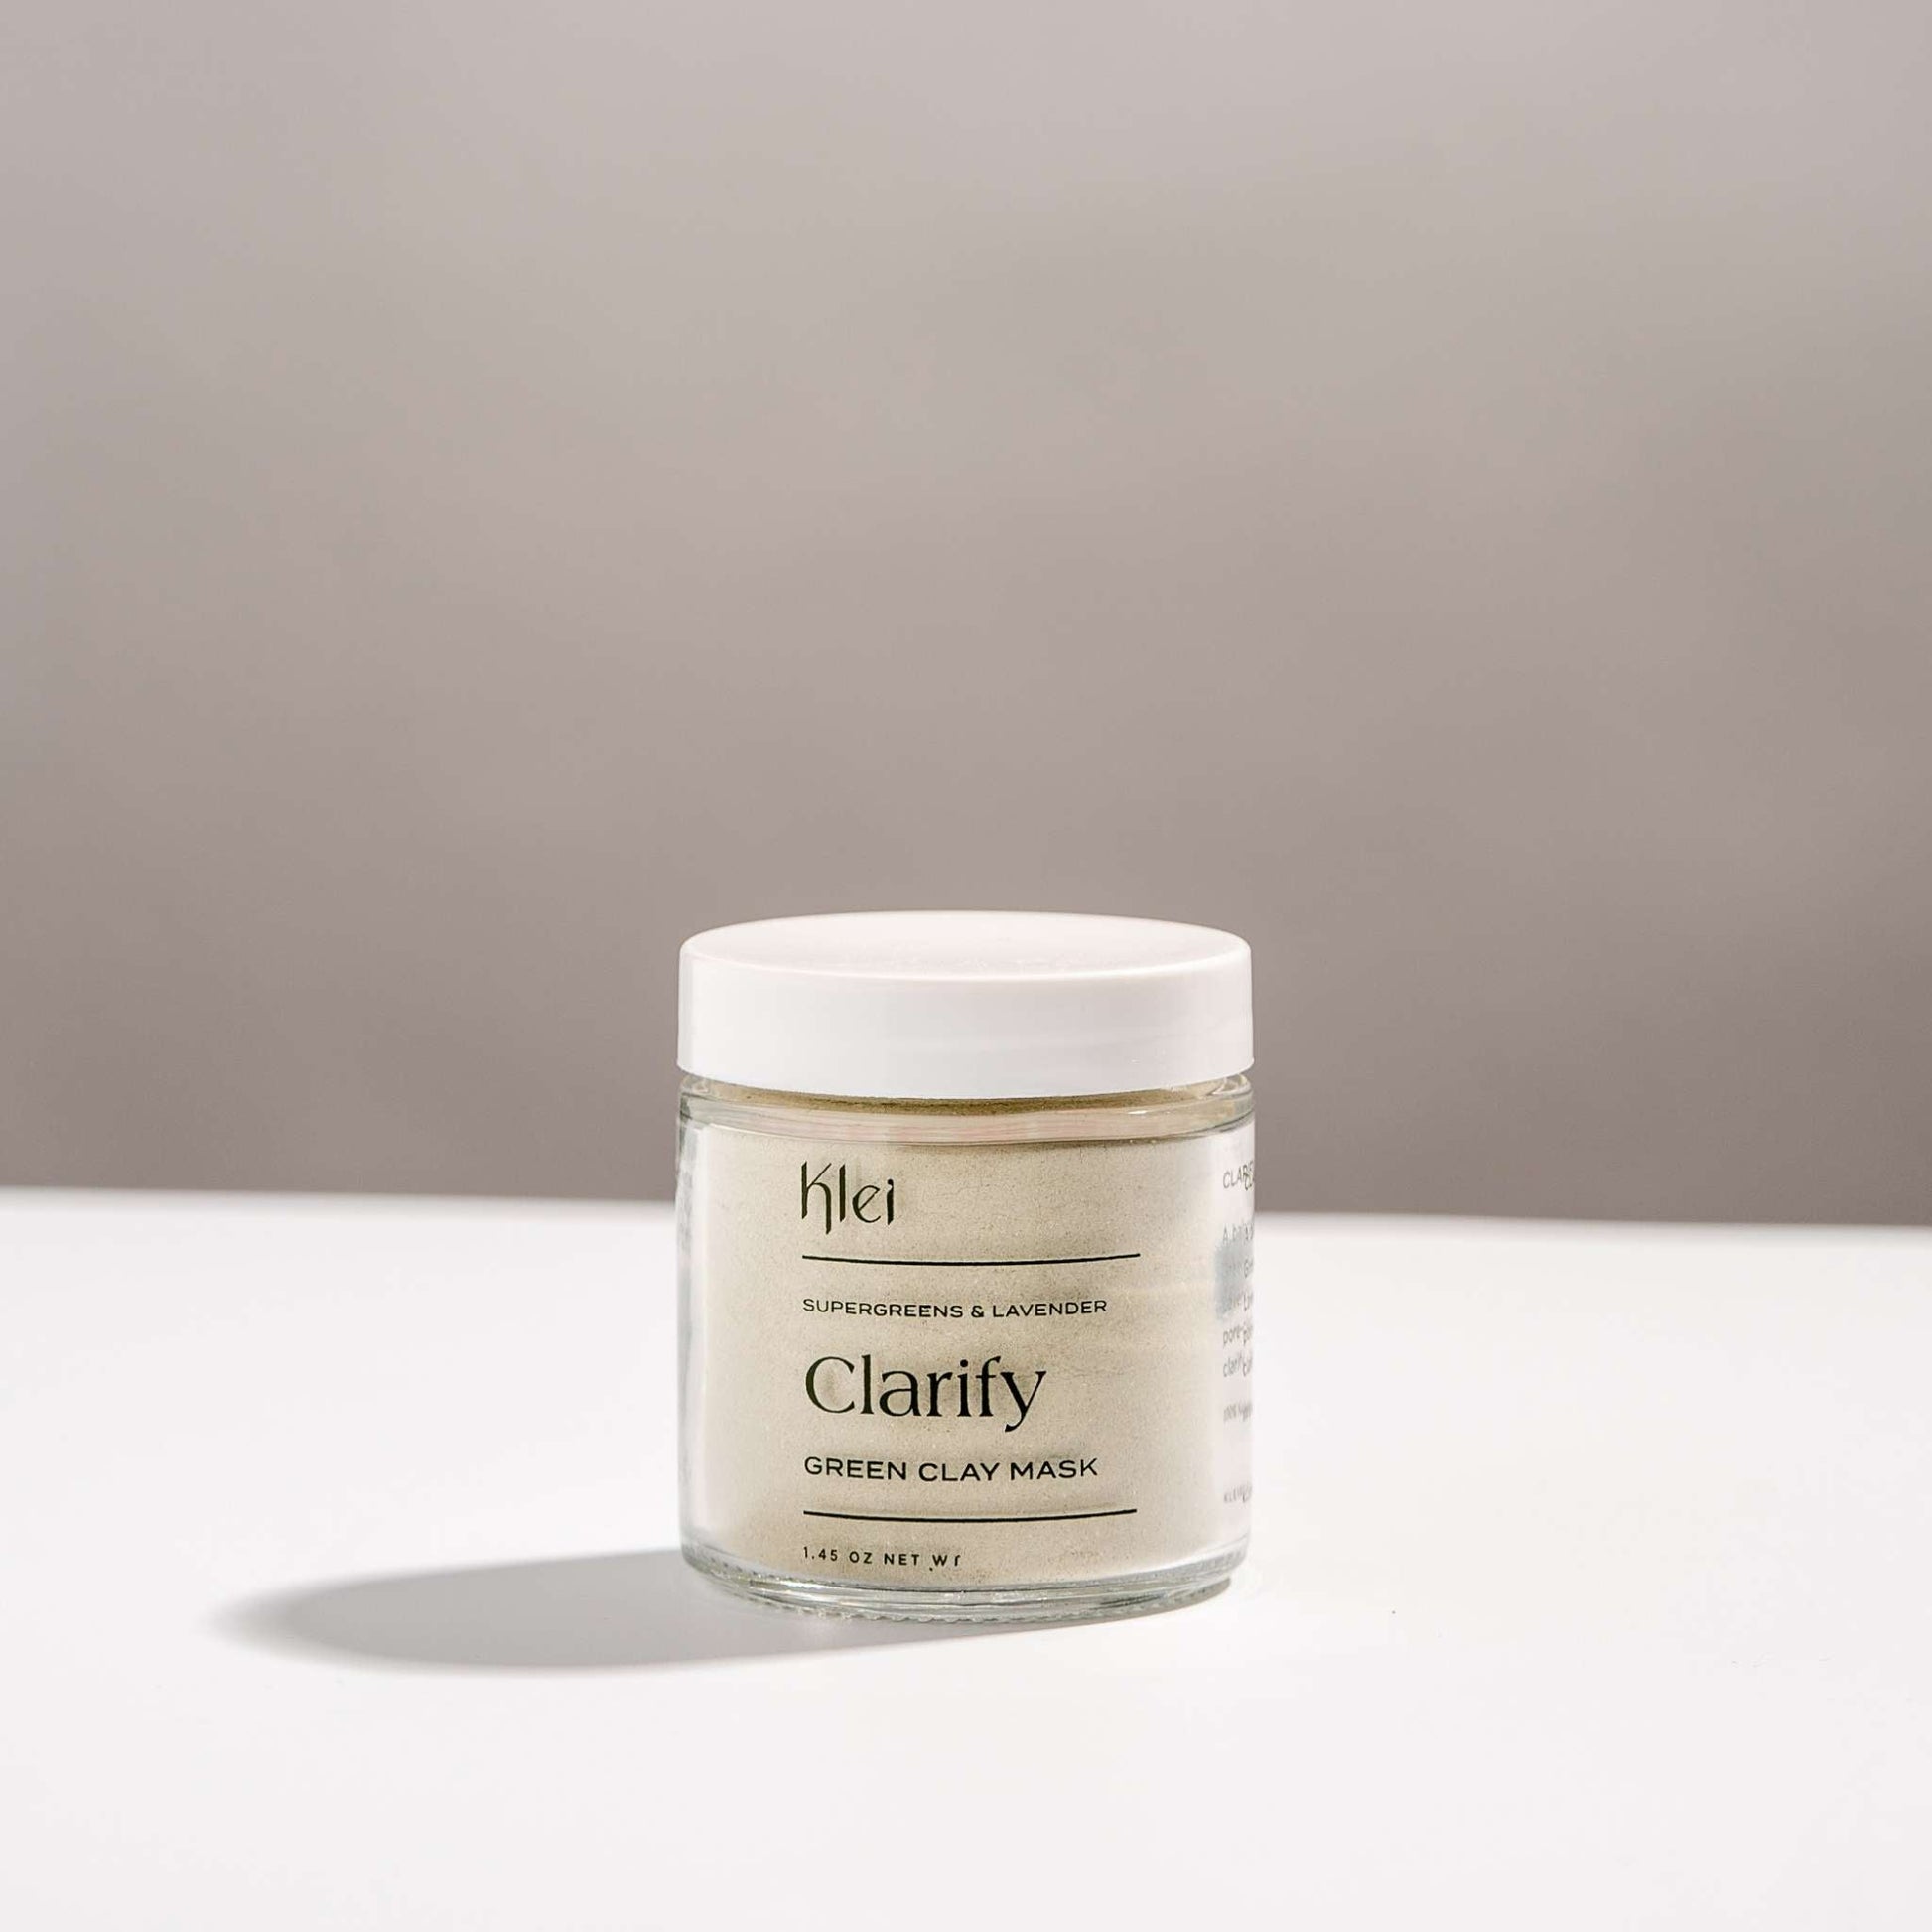 Clarify Green Clay Mask - The Crowd Went Wild